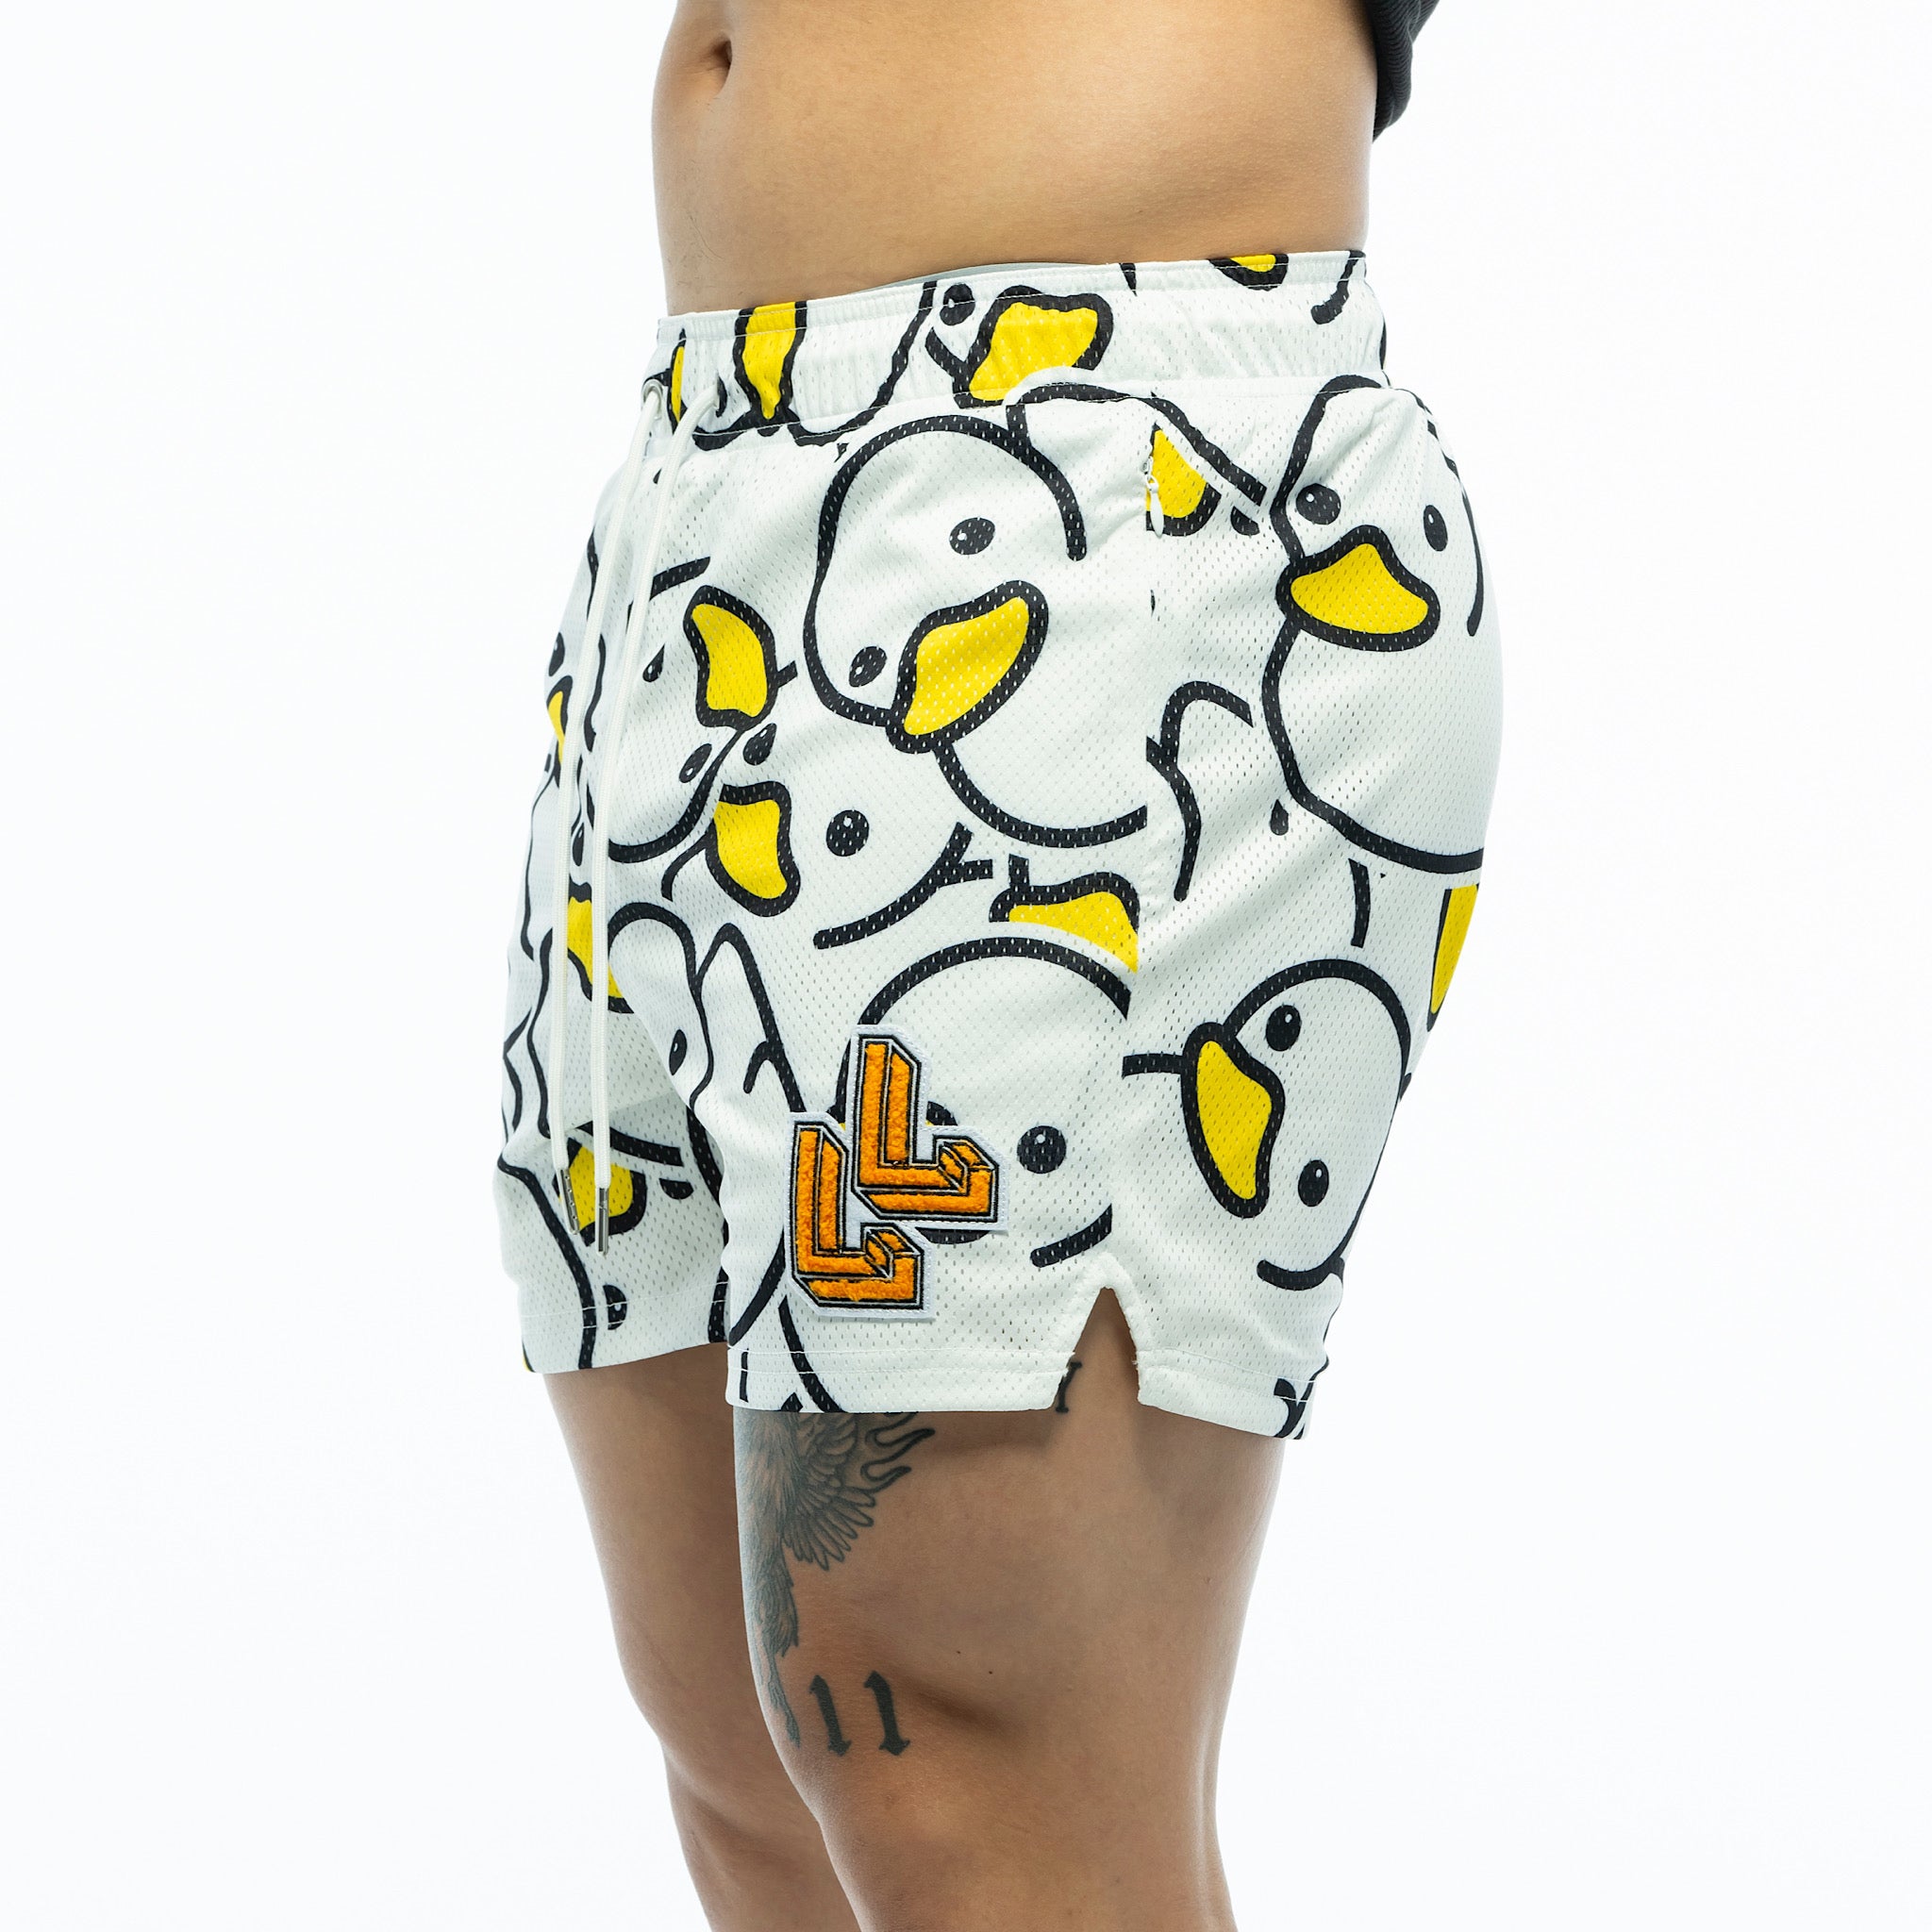 White Ducky workout shorts